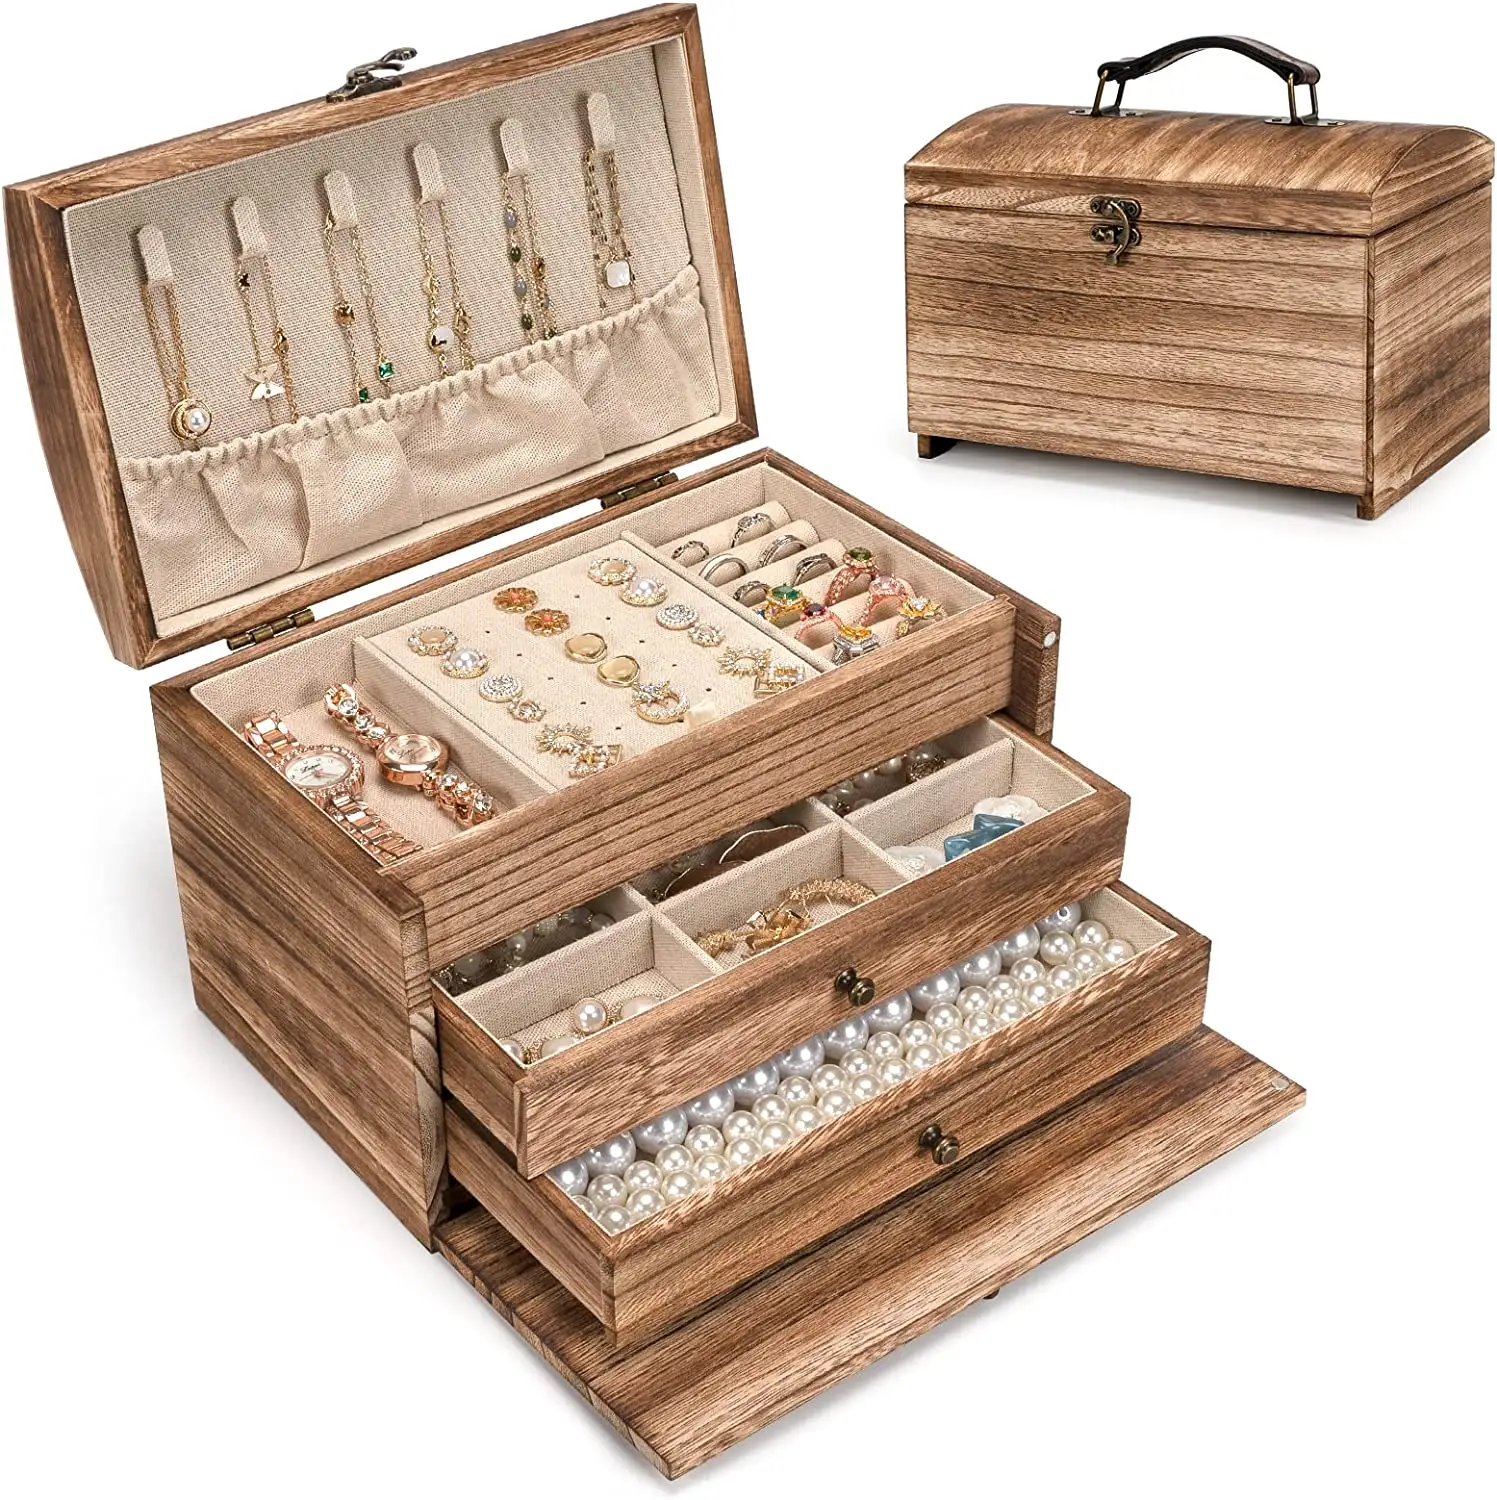 Jewelry Box Organizer, Wooden Jewelry Boxes for Women Girls, 3 Layer Travel Jewelry Case for Earring Necklace Rings Bracelets